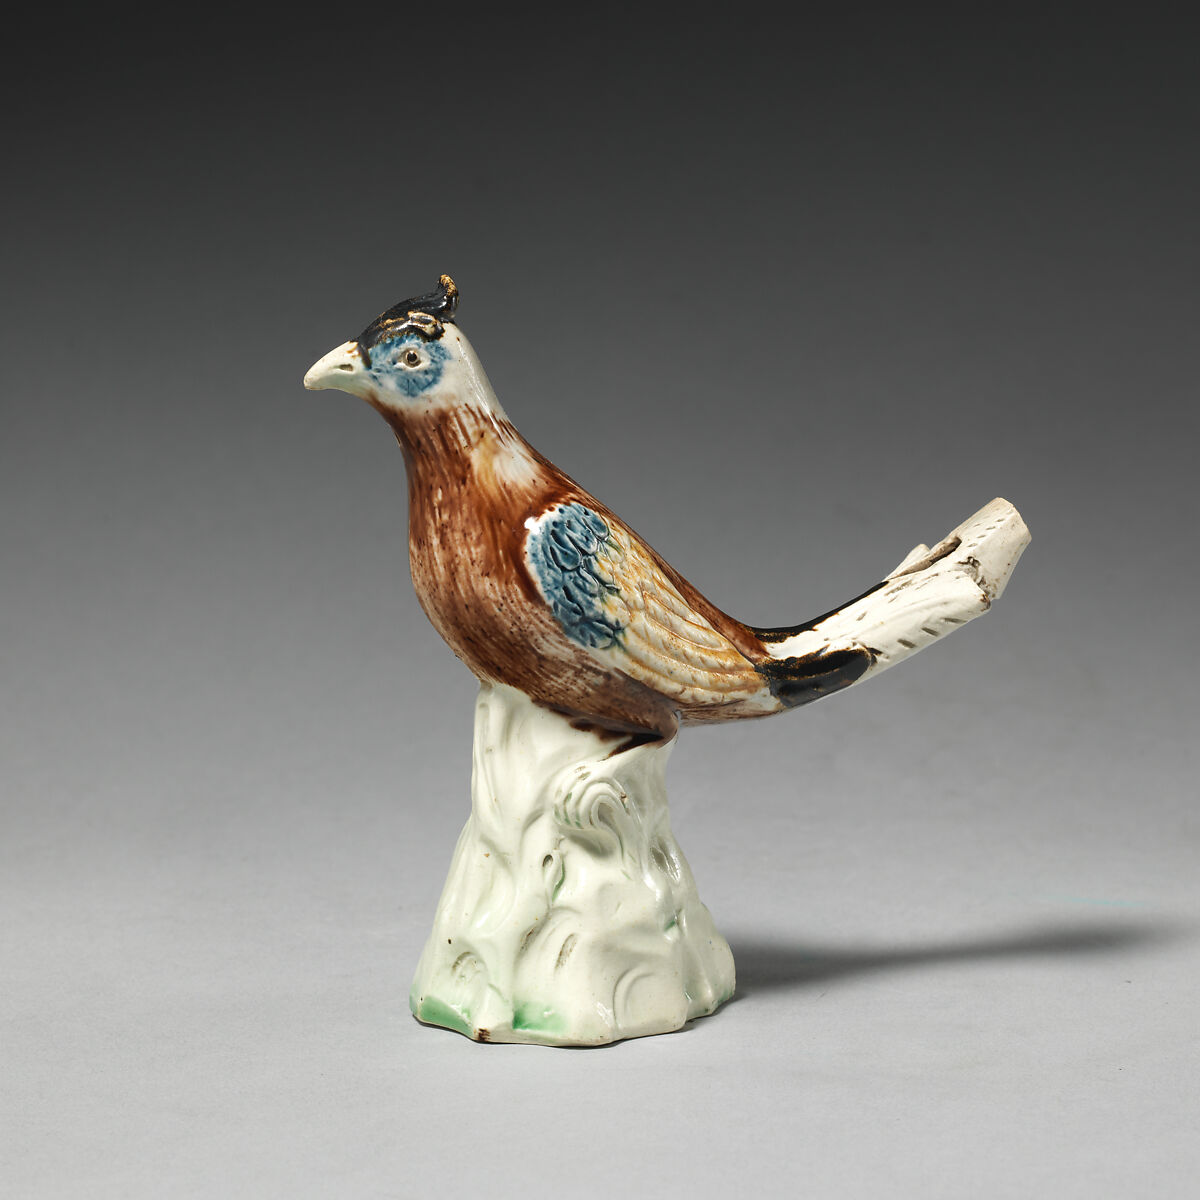 Bird in the form of a whistle, Style of Whieldon type, Glazed earthenware, British, Staffordshire 